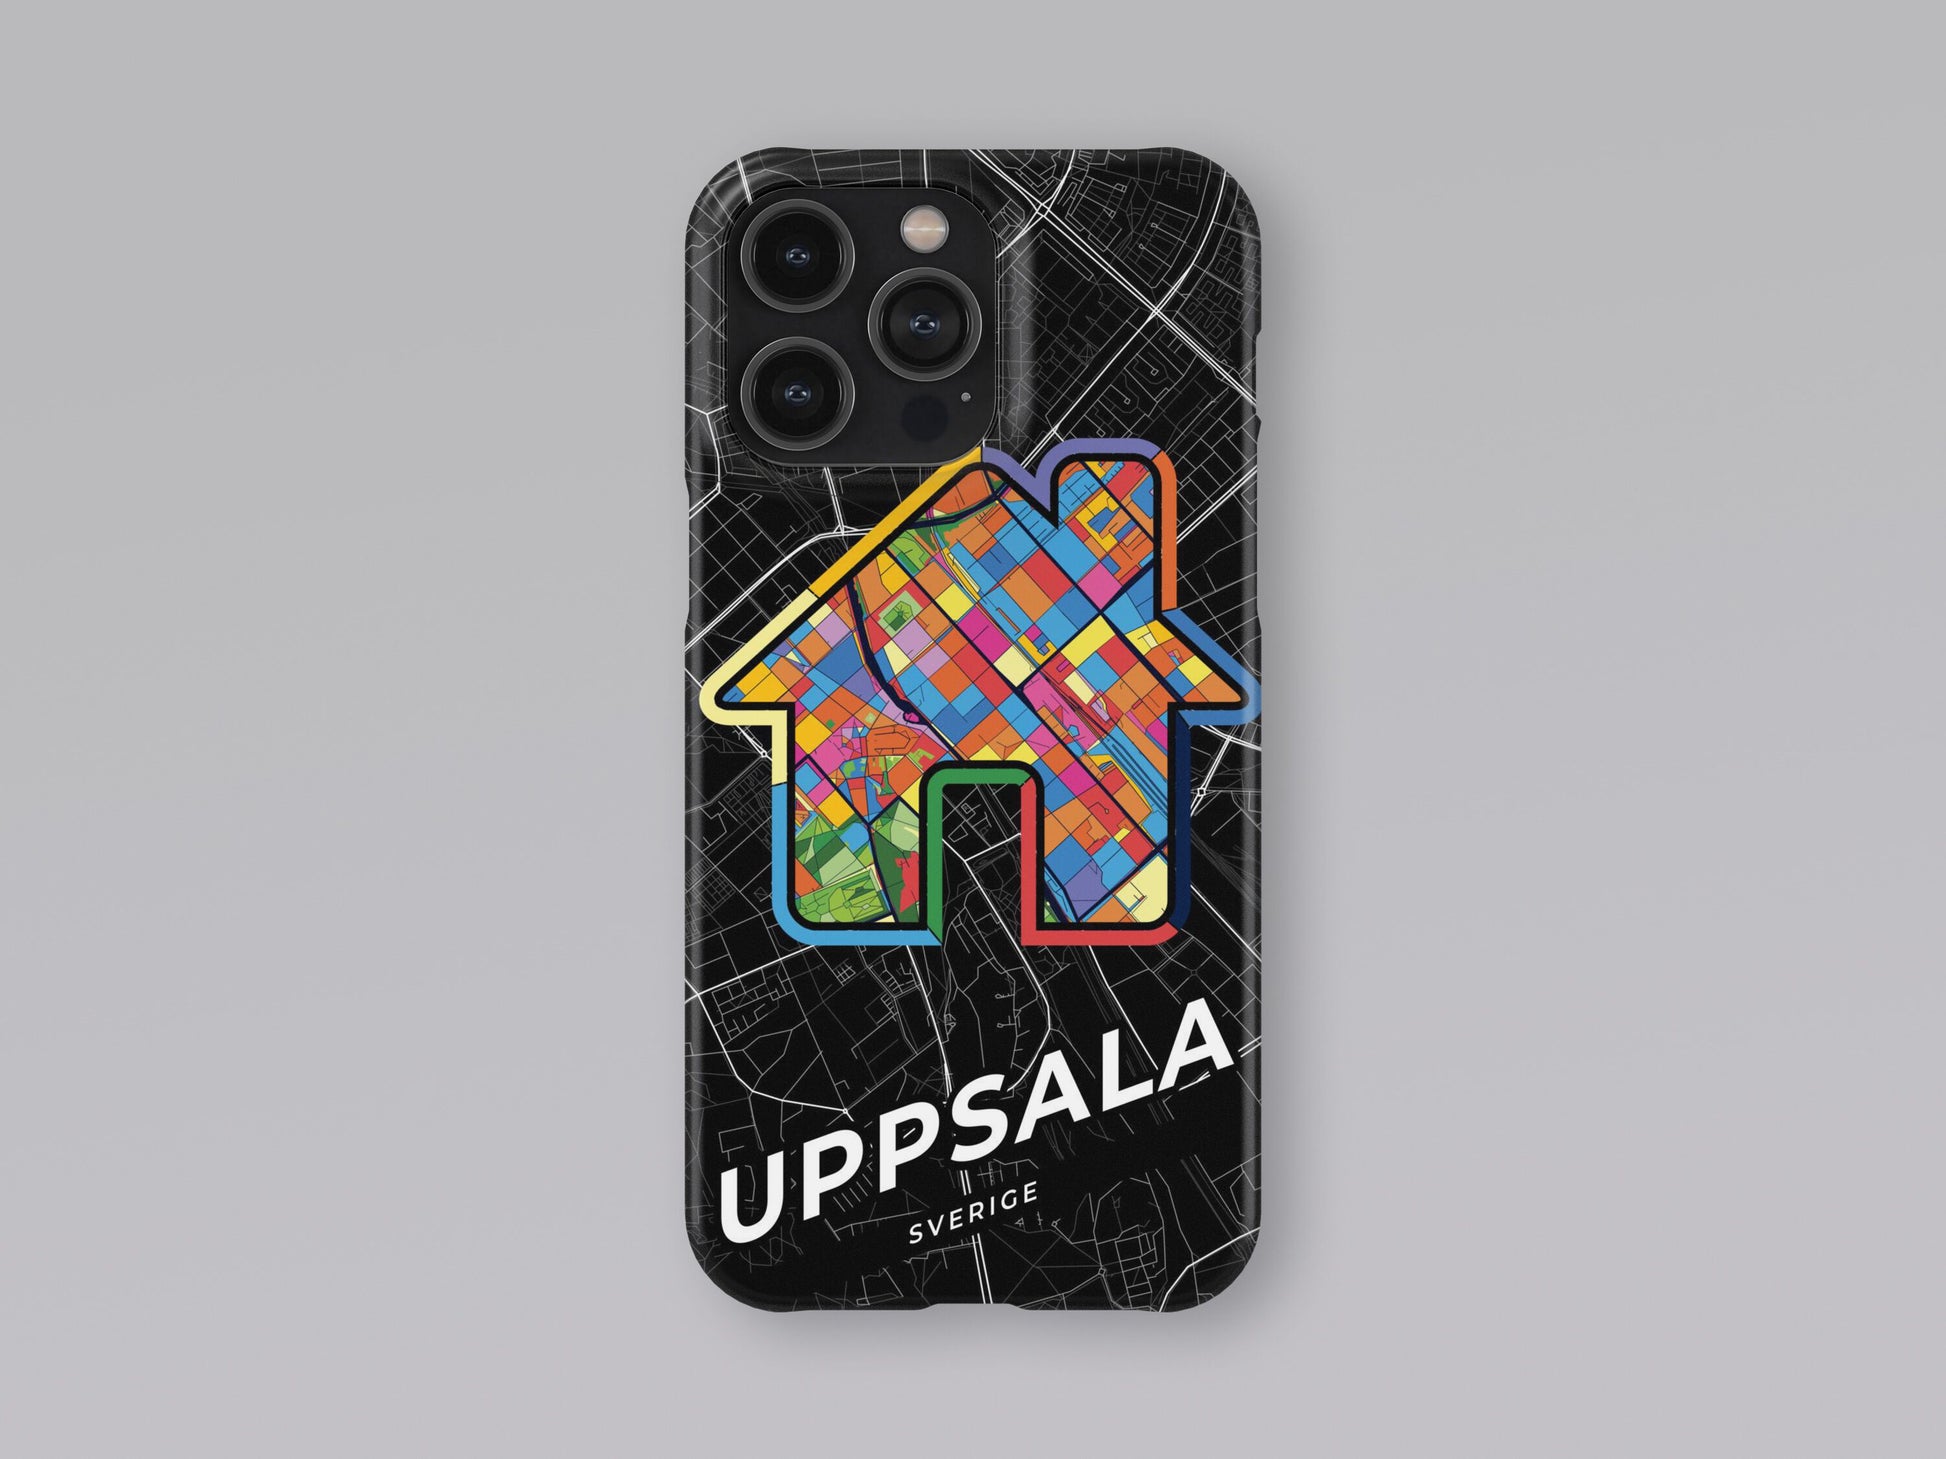 Uppsala Sweden slim phone case with colorful icon 3